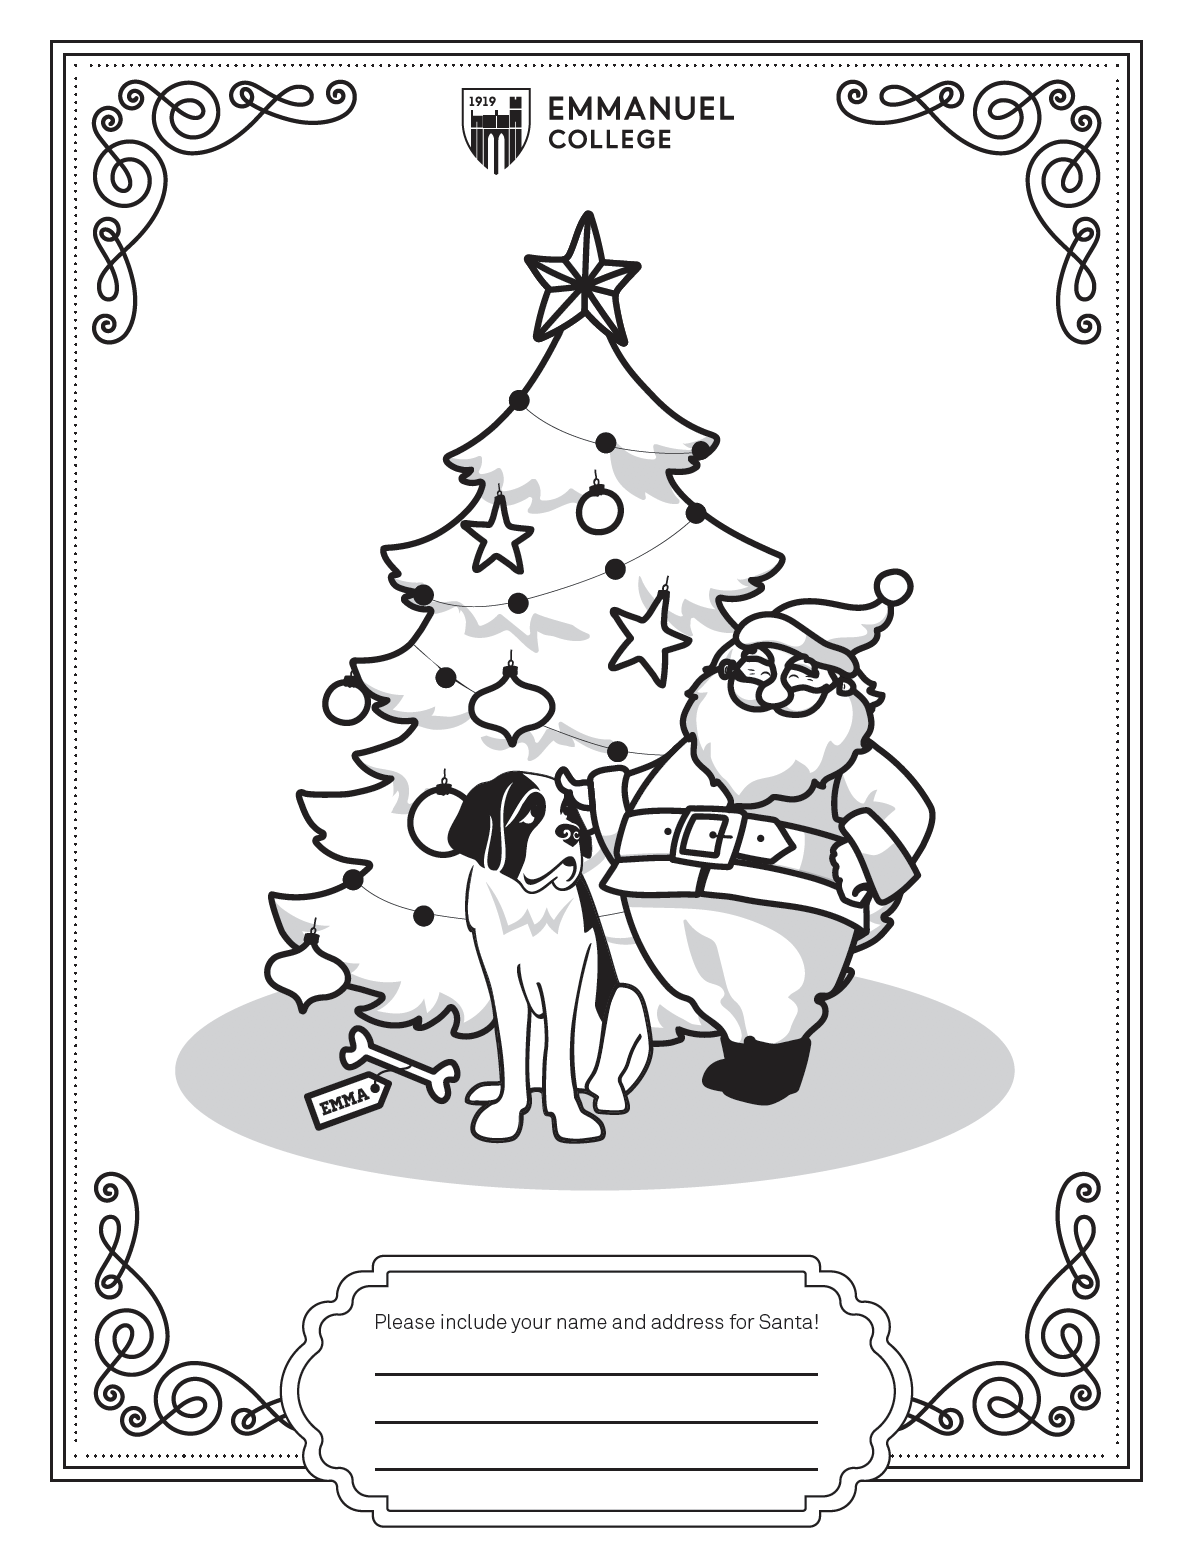 Christmas Coloring Page & Postcards from Santa   Emmanuel College ...